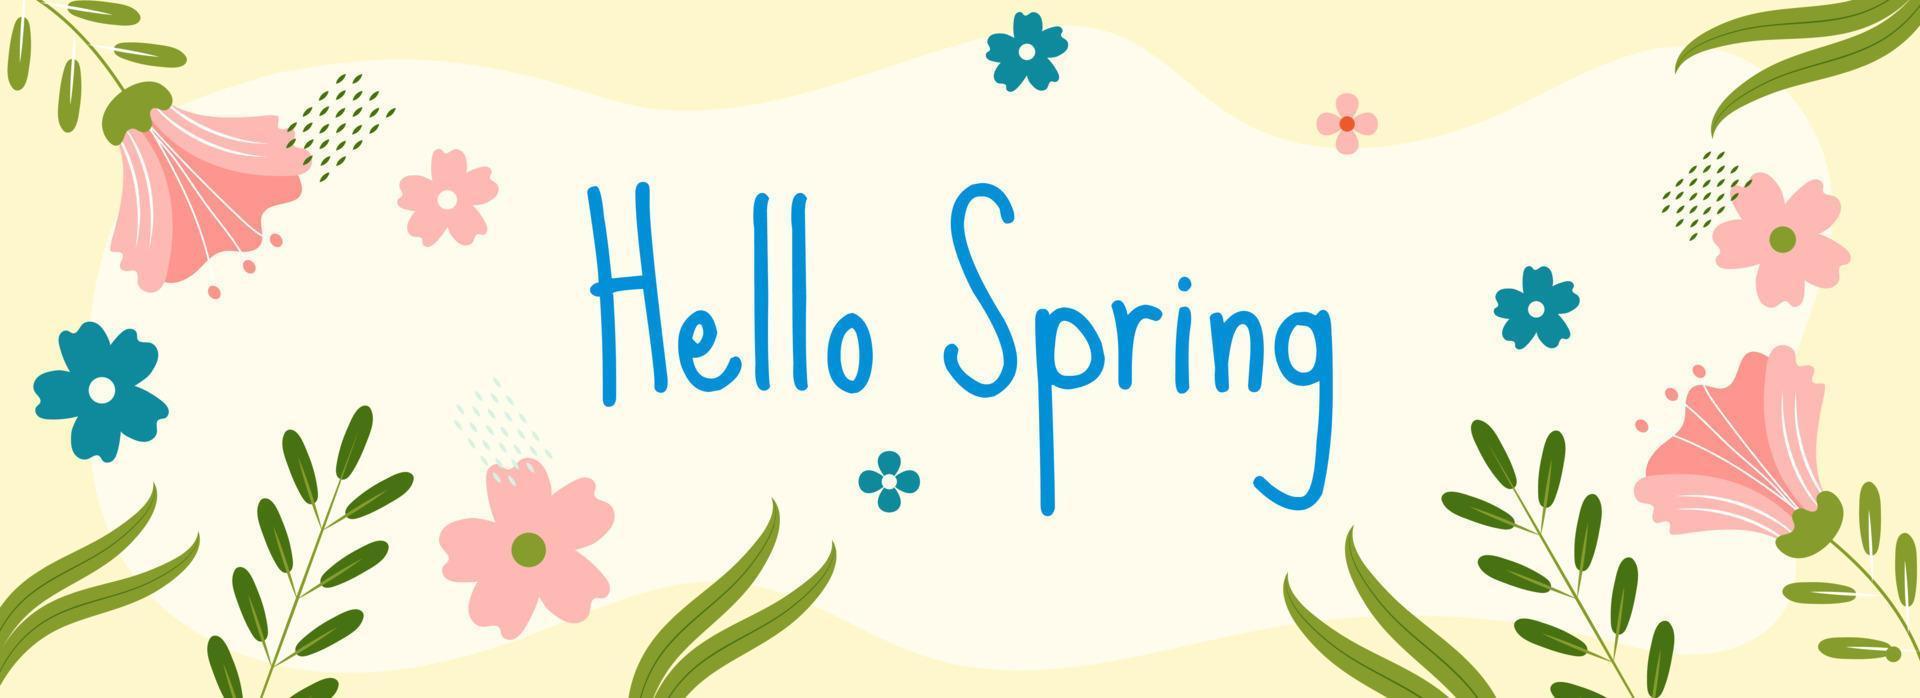 Hello Spring Text on Pastel Yellow Background Decorated with Flowers and Leaves. vector